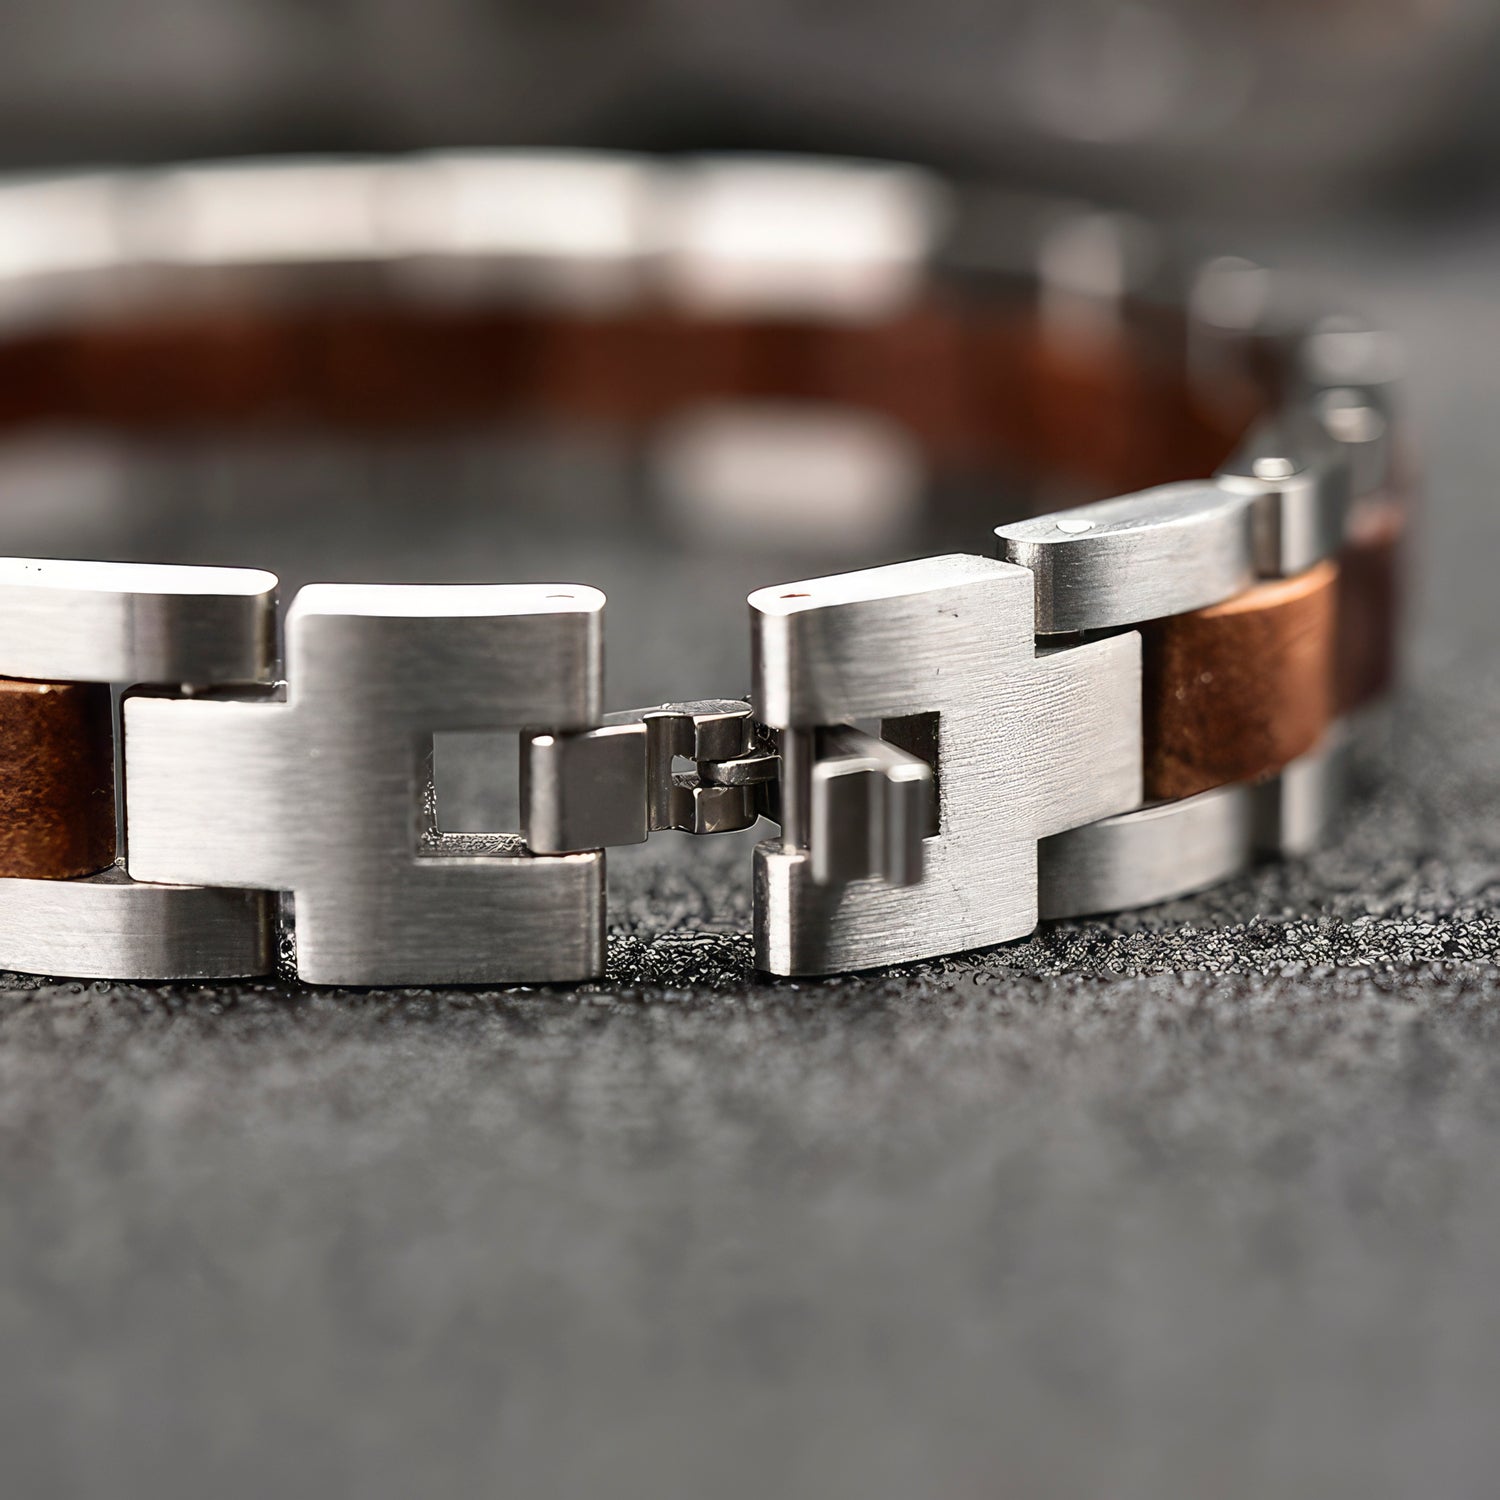 Stainless Steel & Wood Wristband